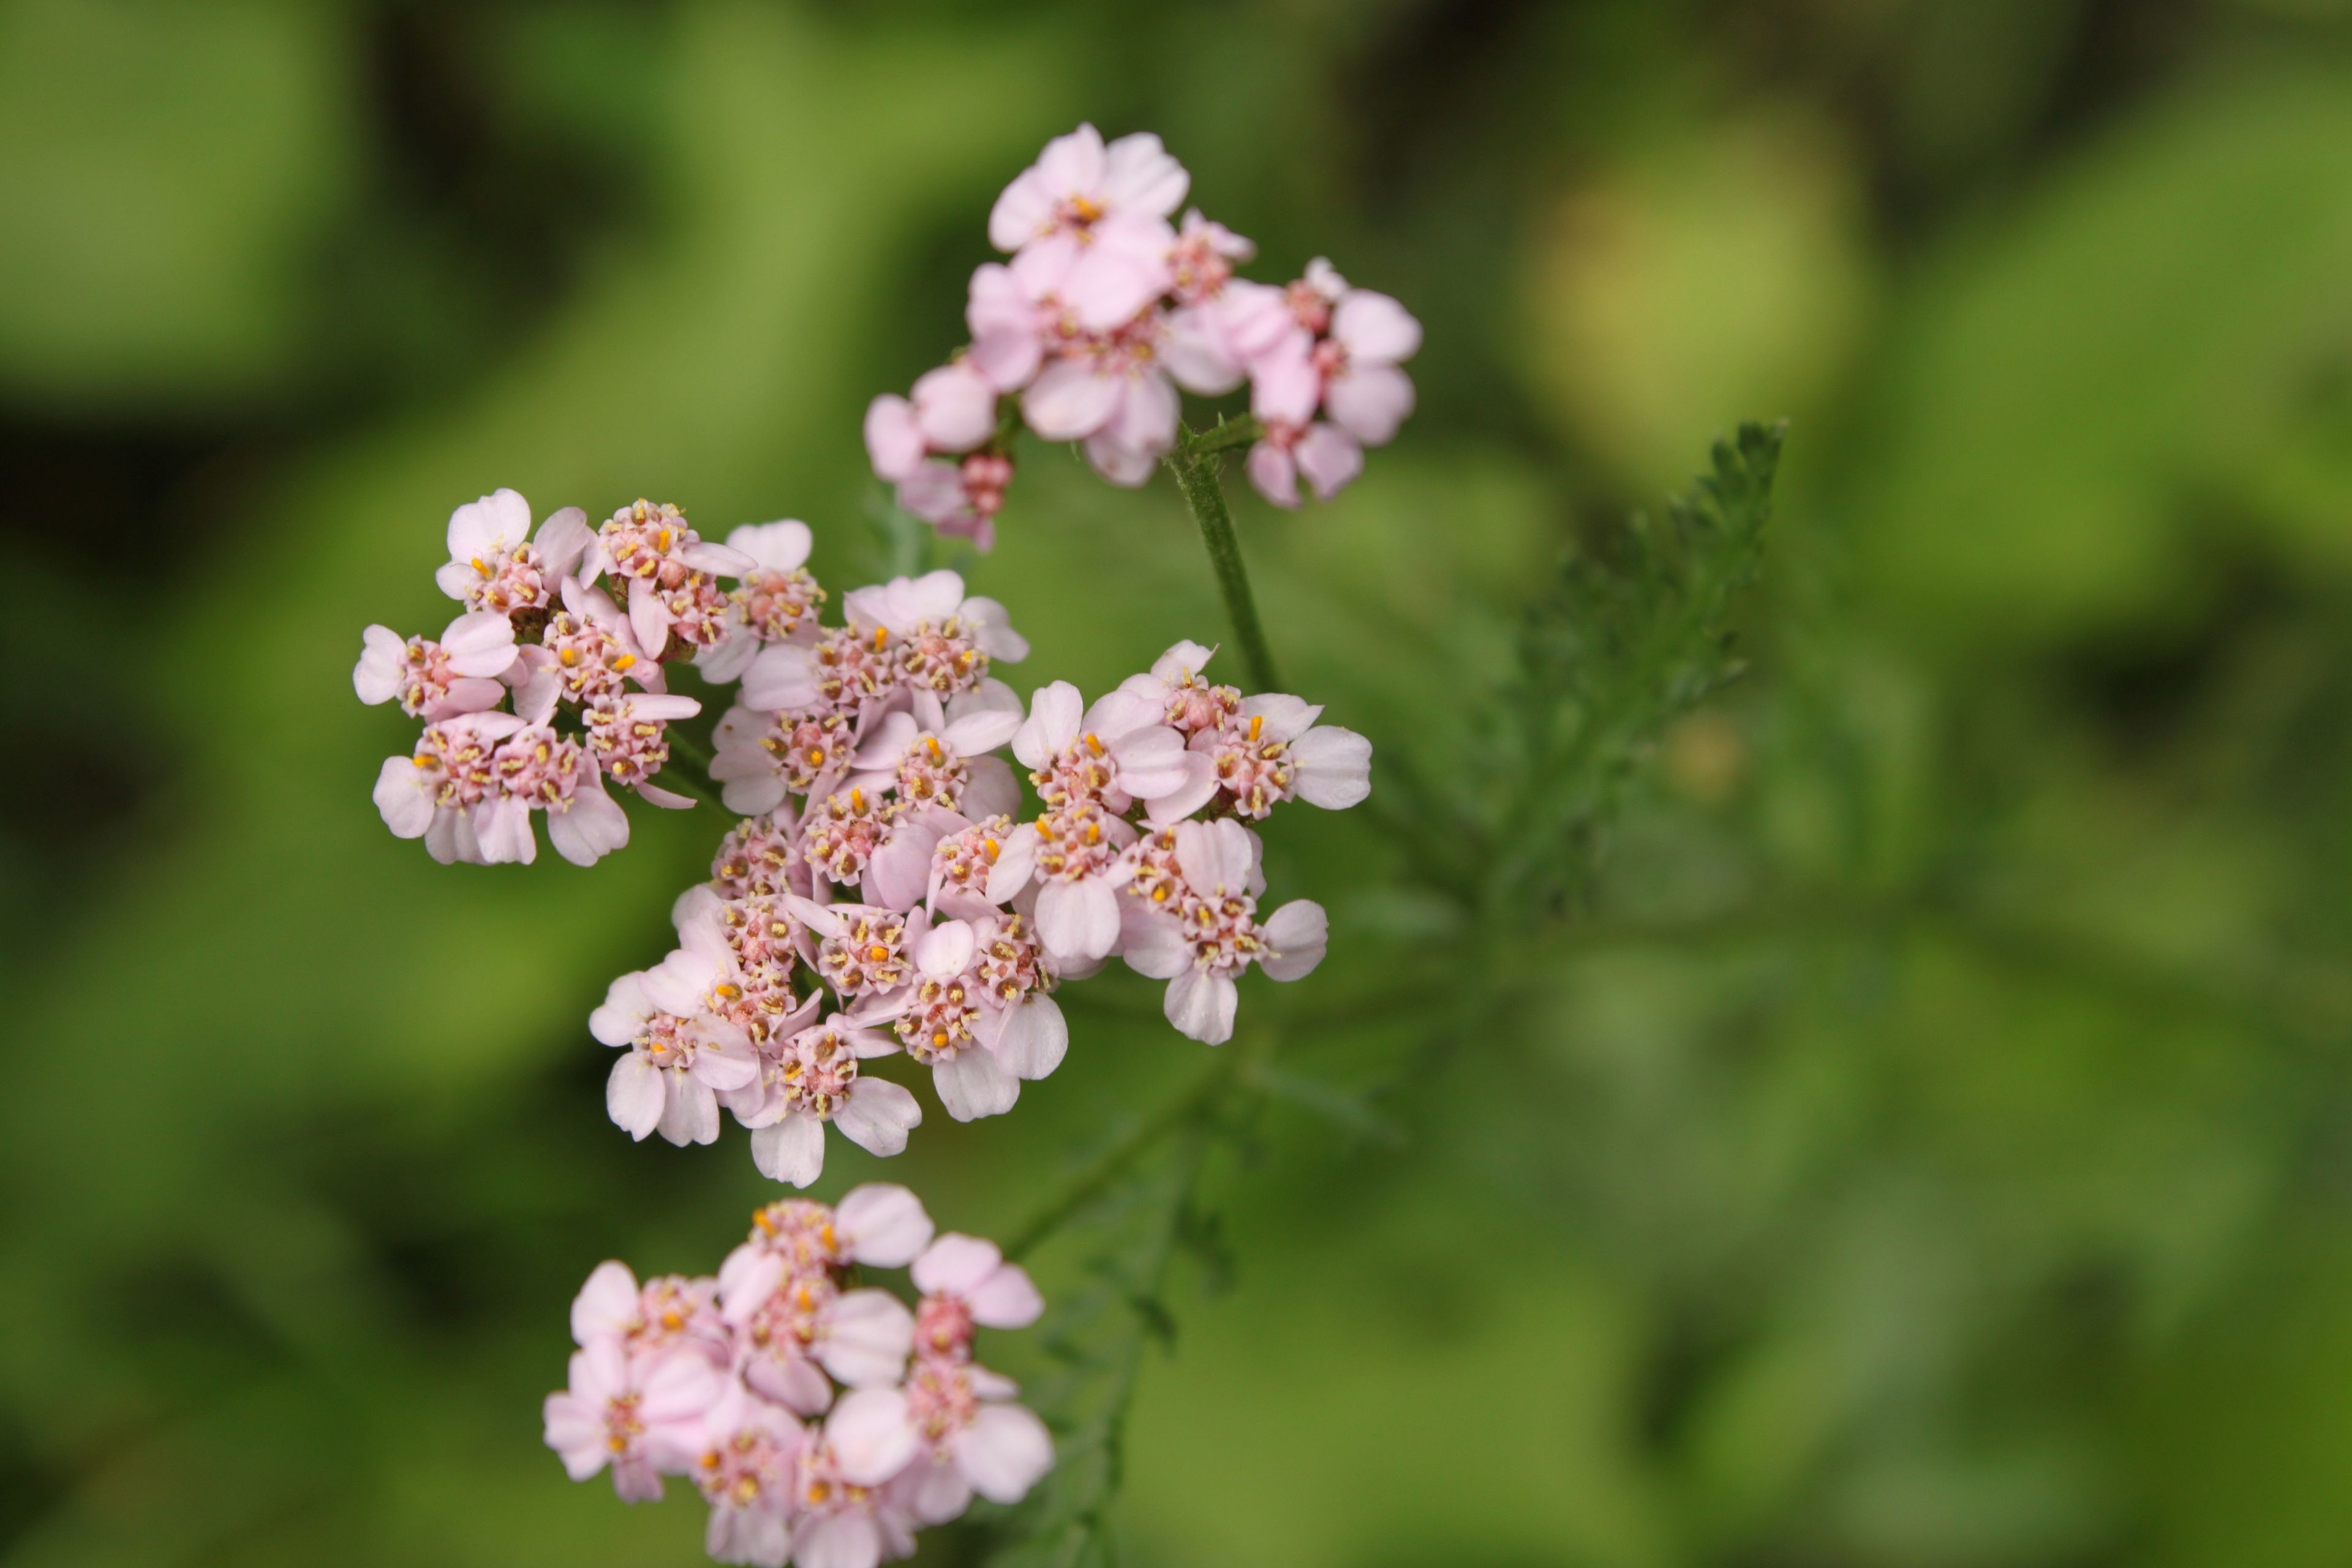 Little pink flowers bloom on a plant.